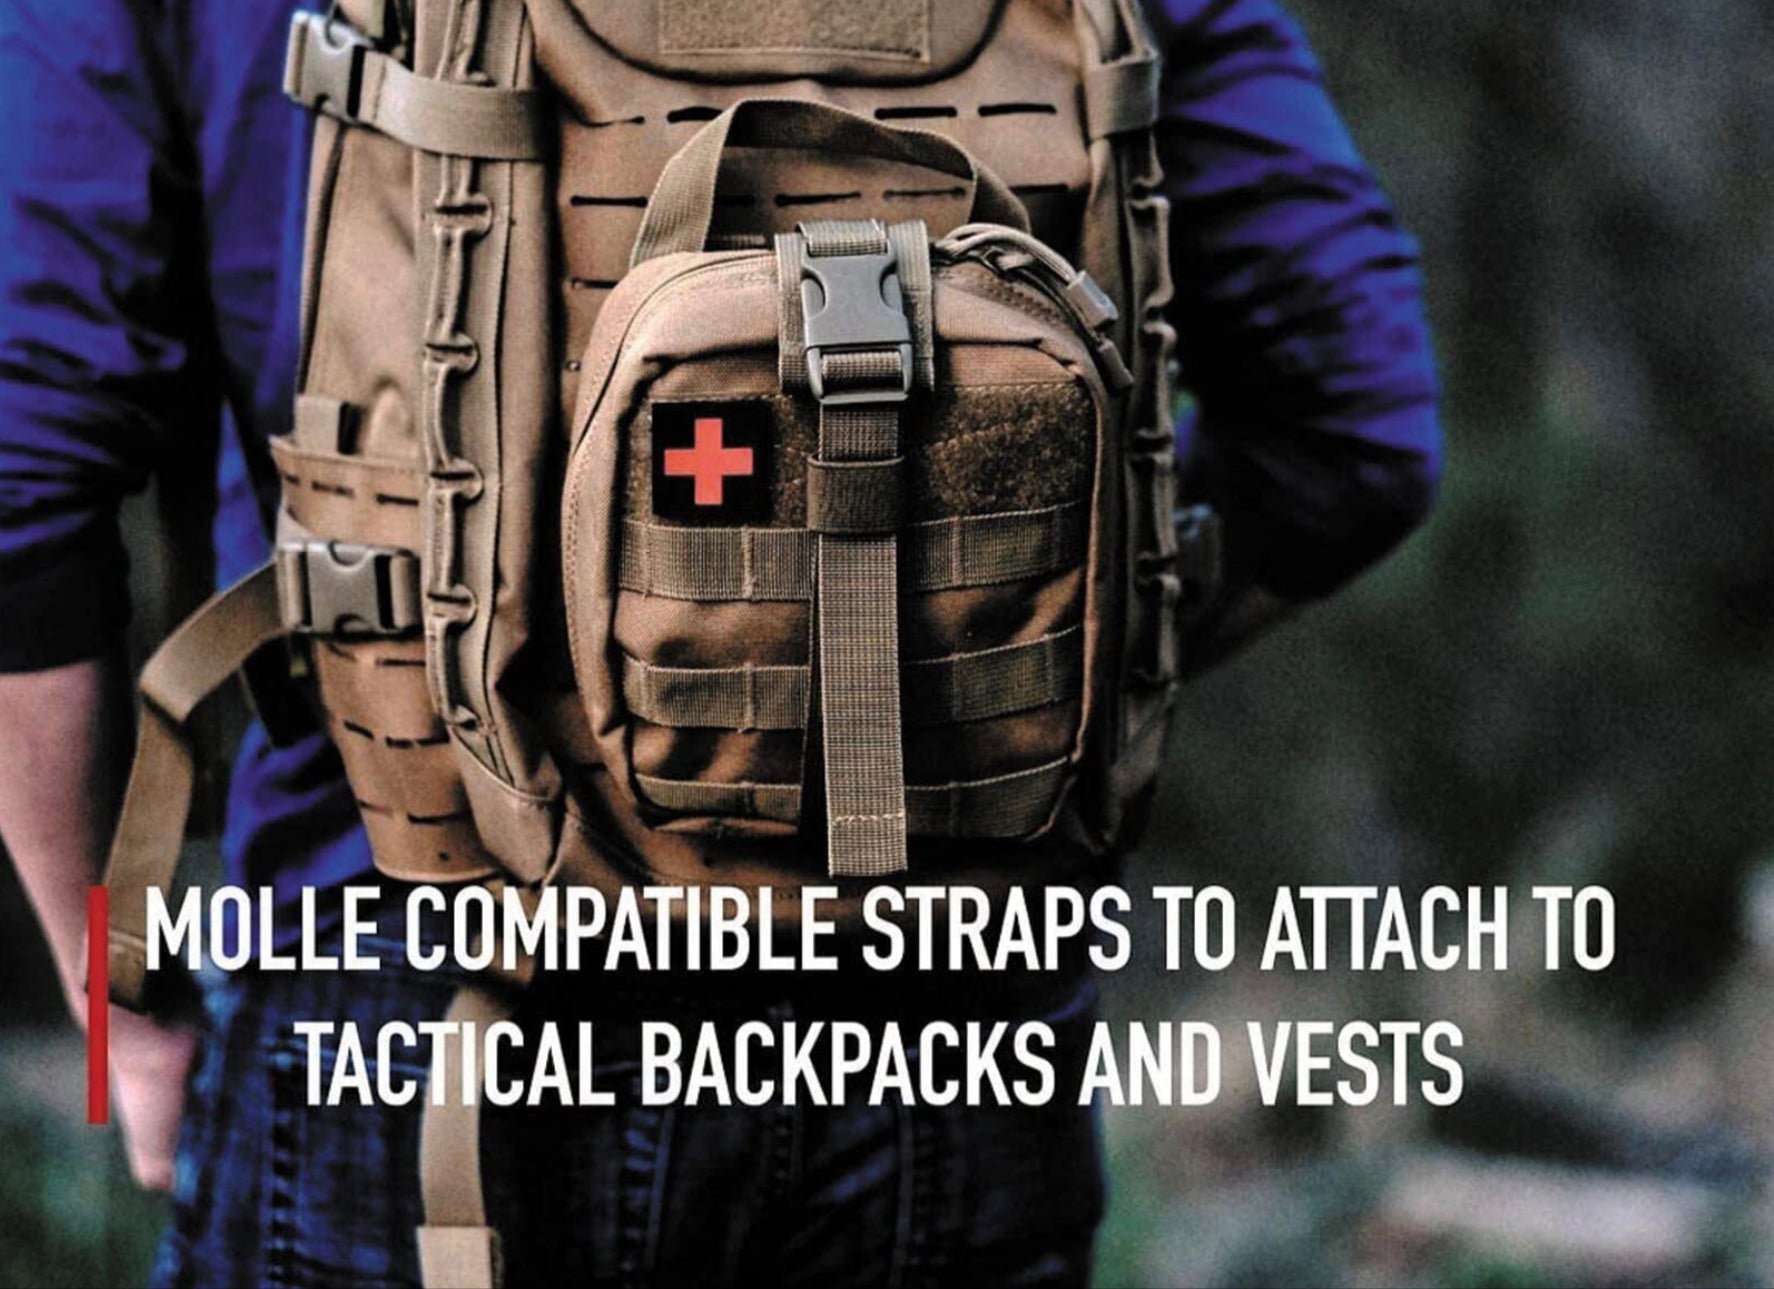 Tactical MOLLE Rip Away EMT Medical First Aid IFAK Pouch (Bag Only) - Badger Survival 